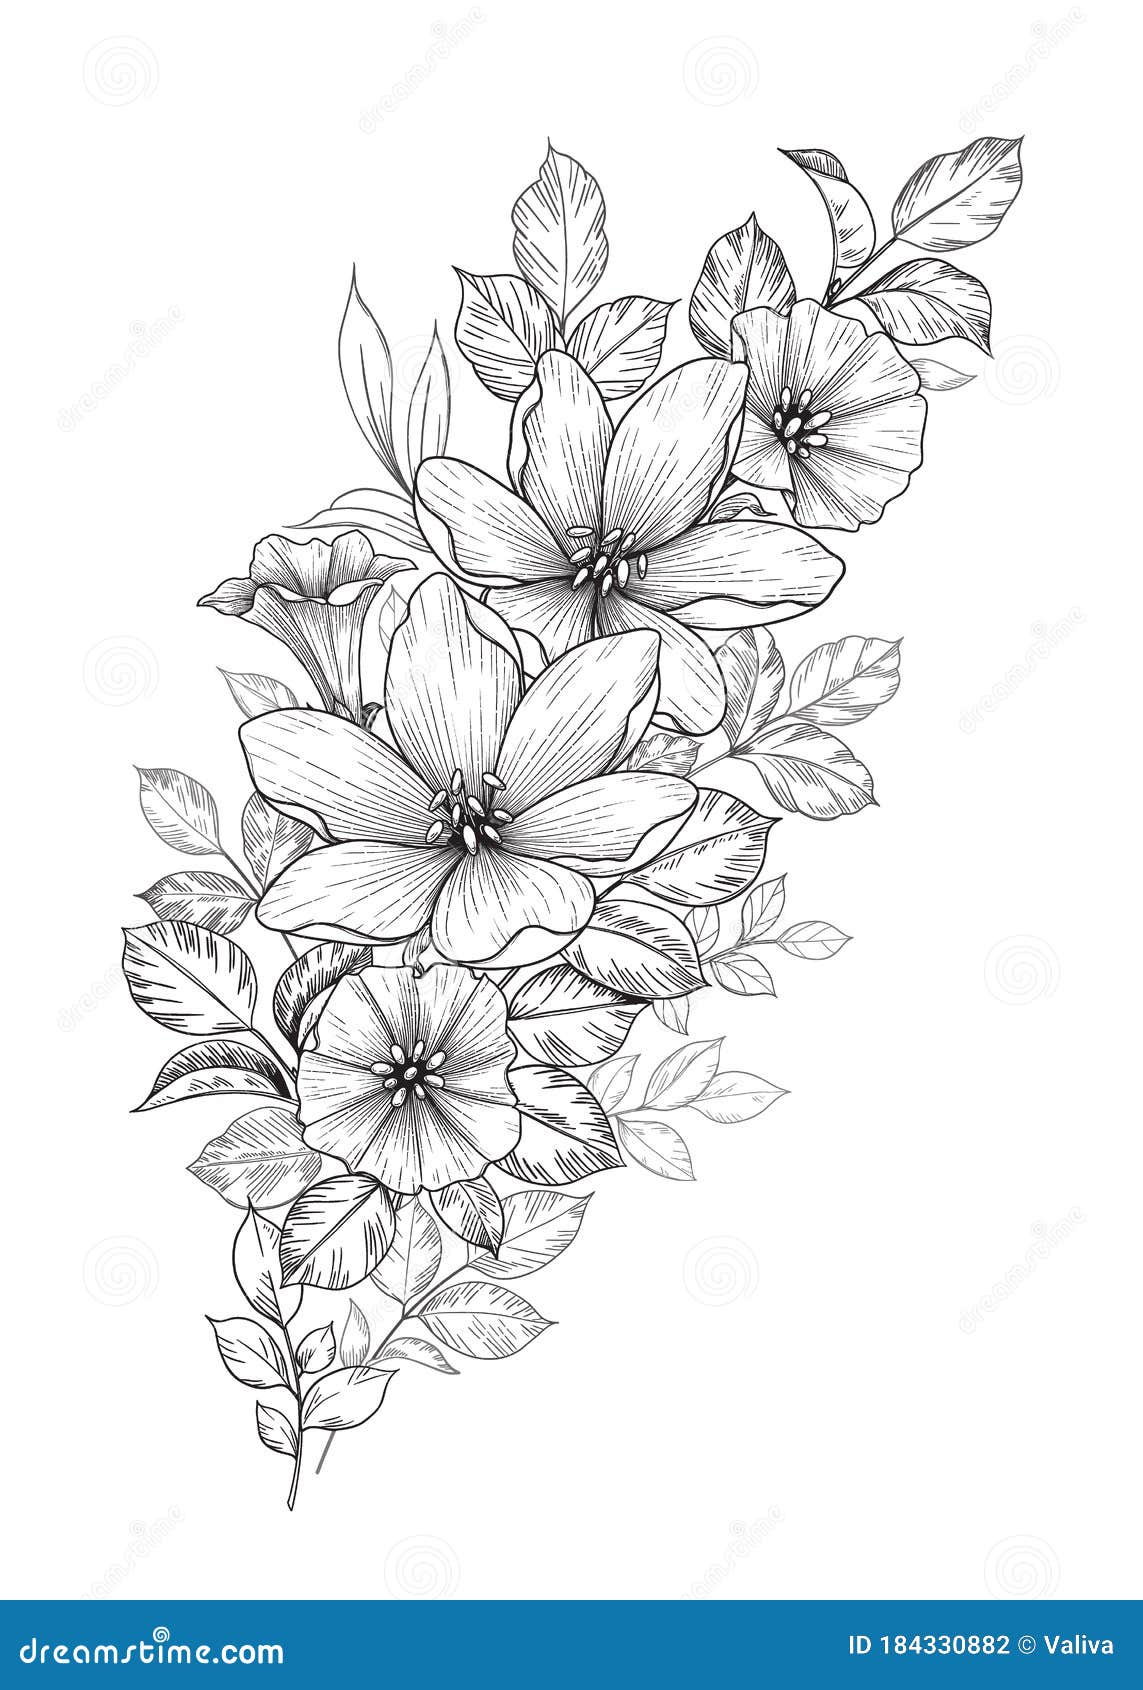 Hand Drawn Bunch with Flowers Stock Vector - Illustration of floral ...